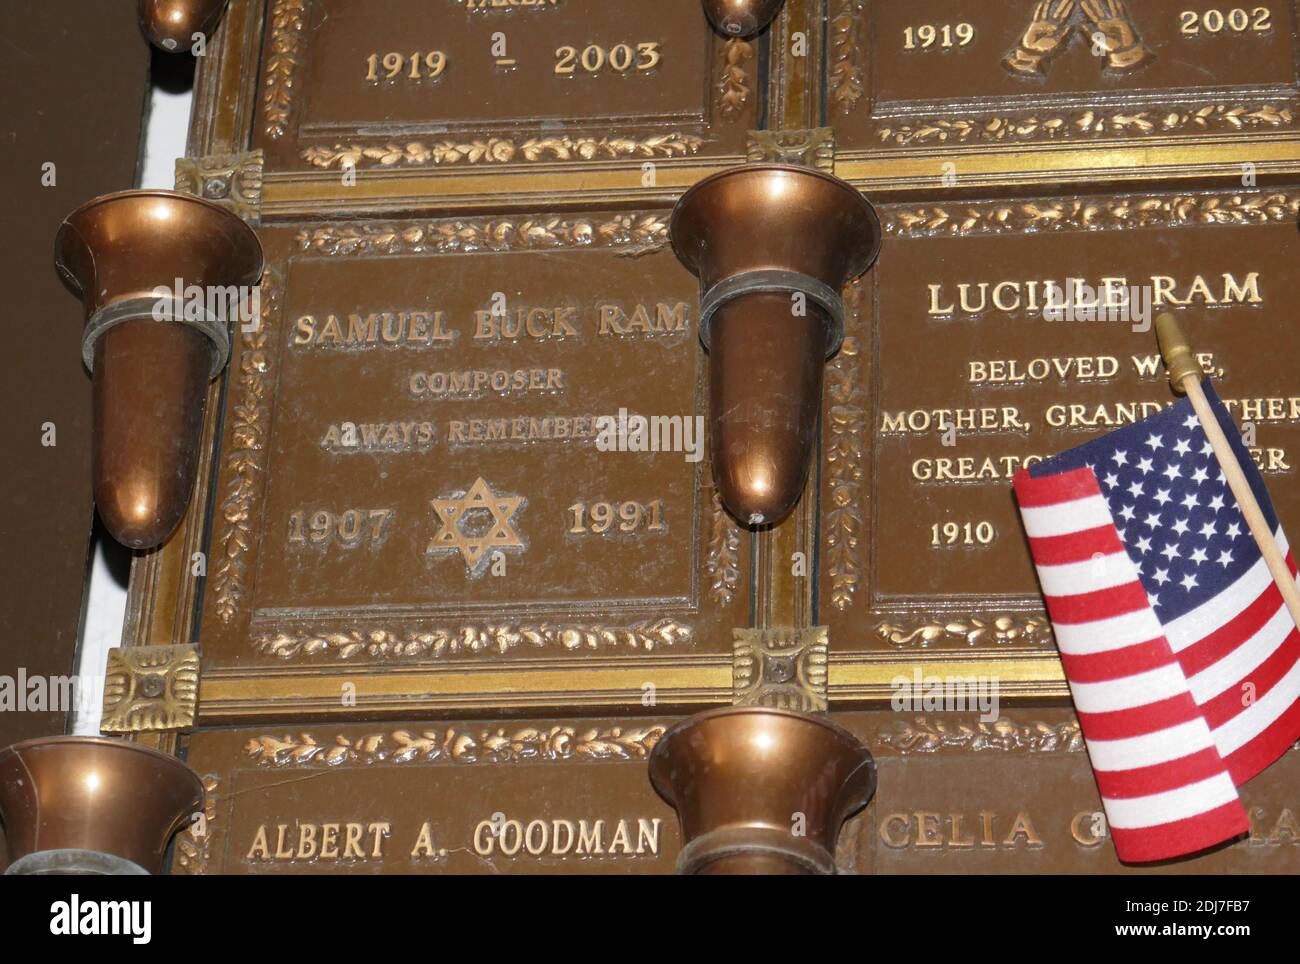 Mission Hills, California, USA 6th December 2020 A general view of atmosphere of composer Buck Ram's Grave in Court of the Tribes Mausoleum at Eden Memorial Park Cemetery on December 6, 2020 in Mission Hills, California, USA. Photo by Barry King/Alamy Stock Photo Stock Photo